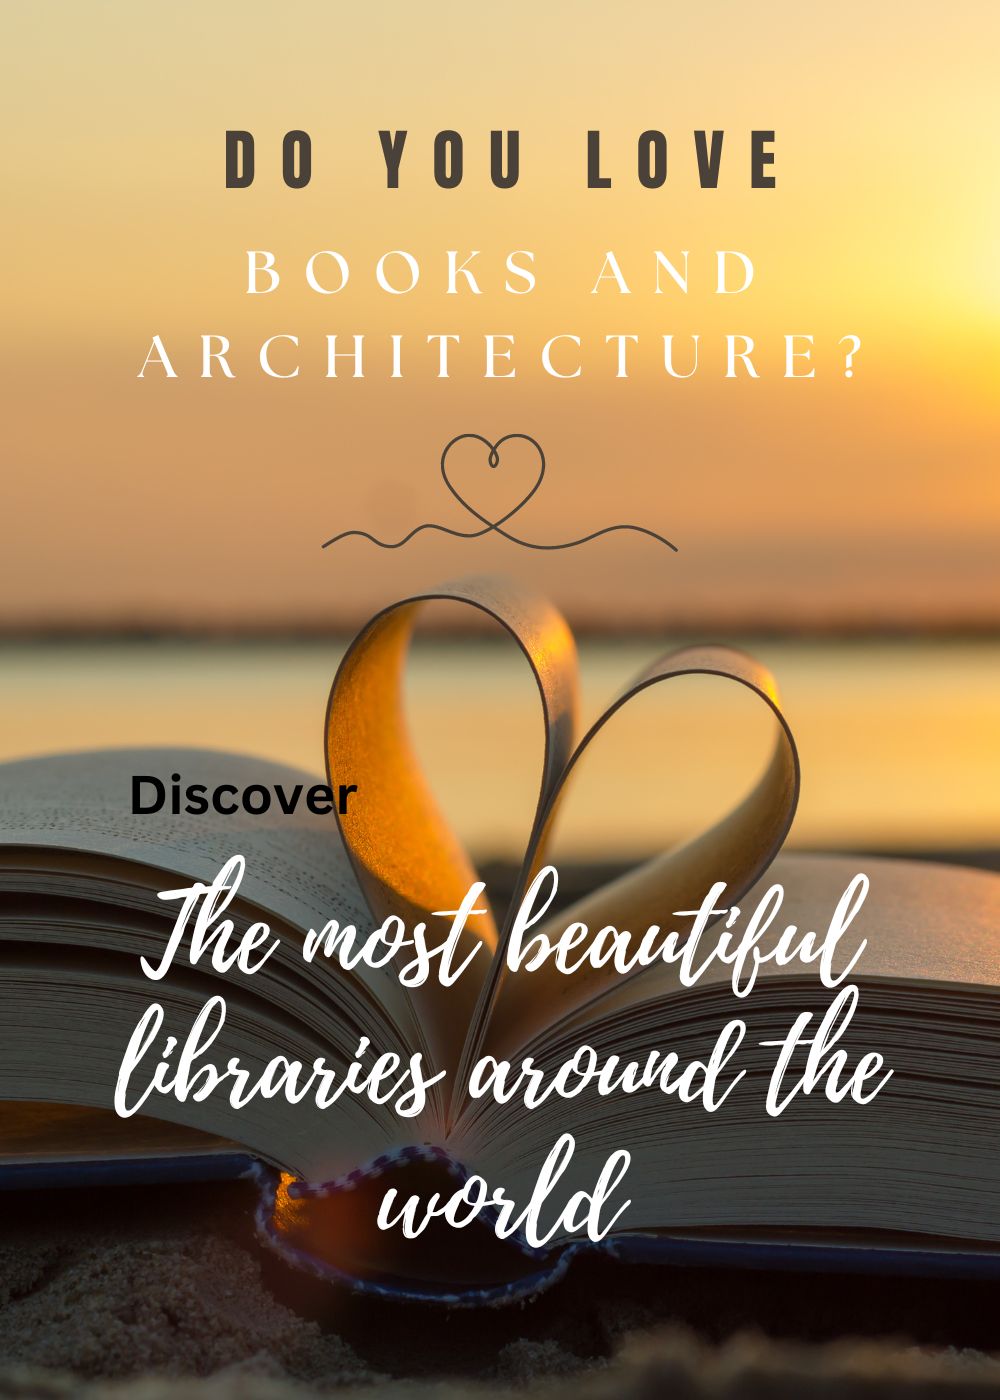 The most beautiful libraries around the world and why you should add them to your travel itinerary